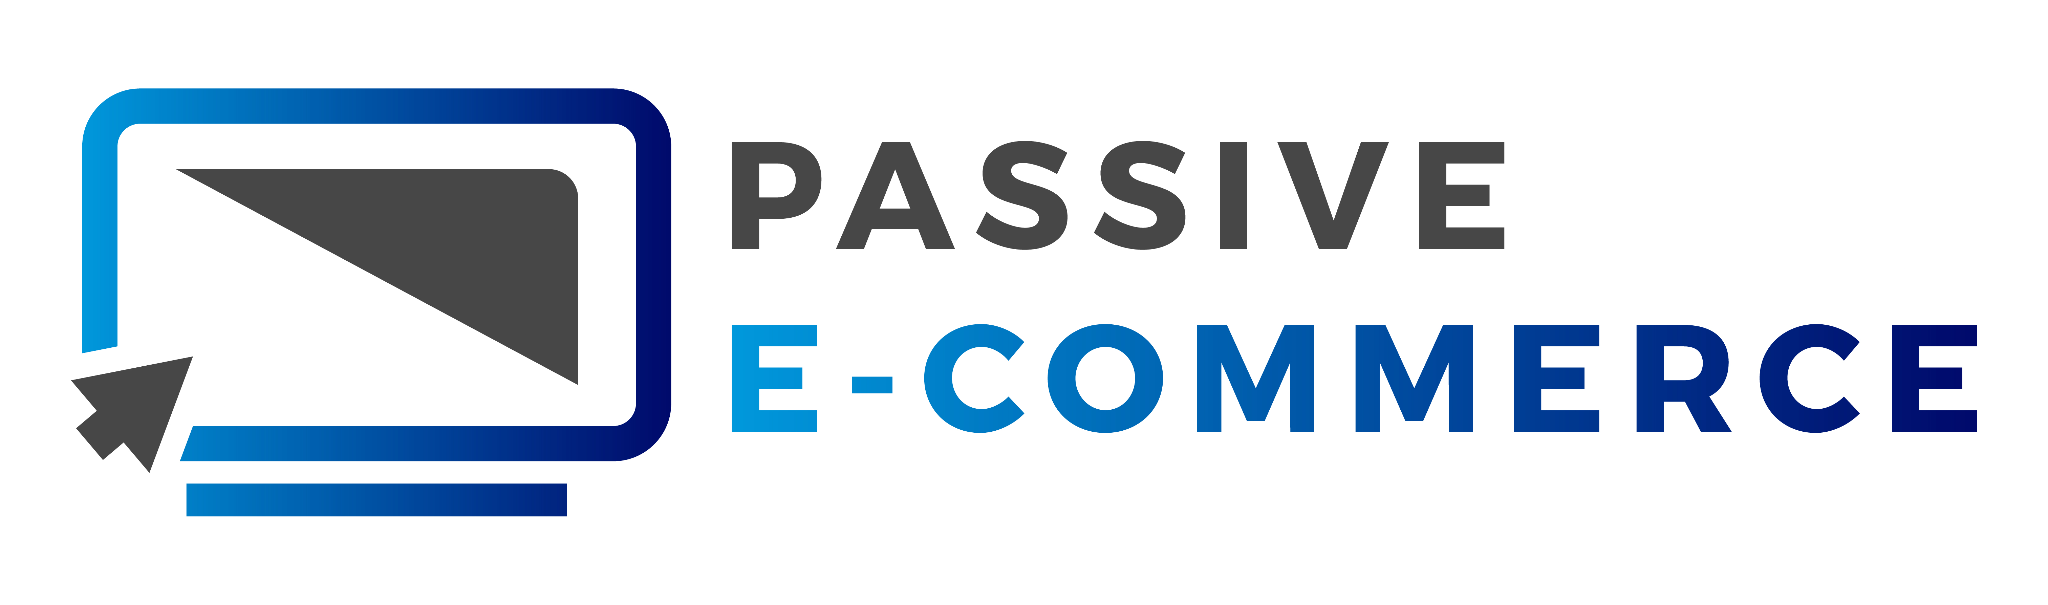 Passive E-commerce LLC, Tuesday, October 5, 2021, Press release picture